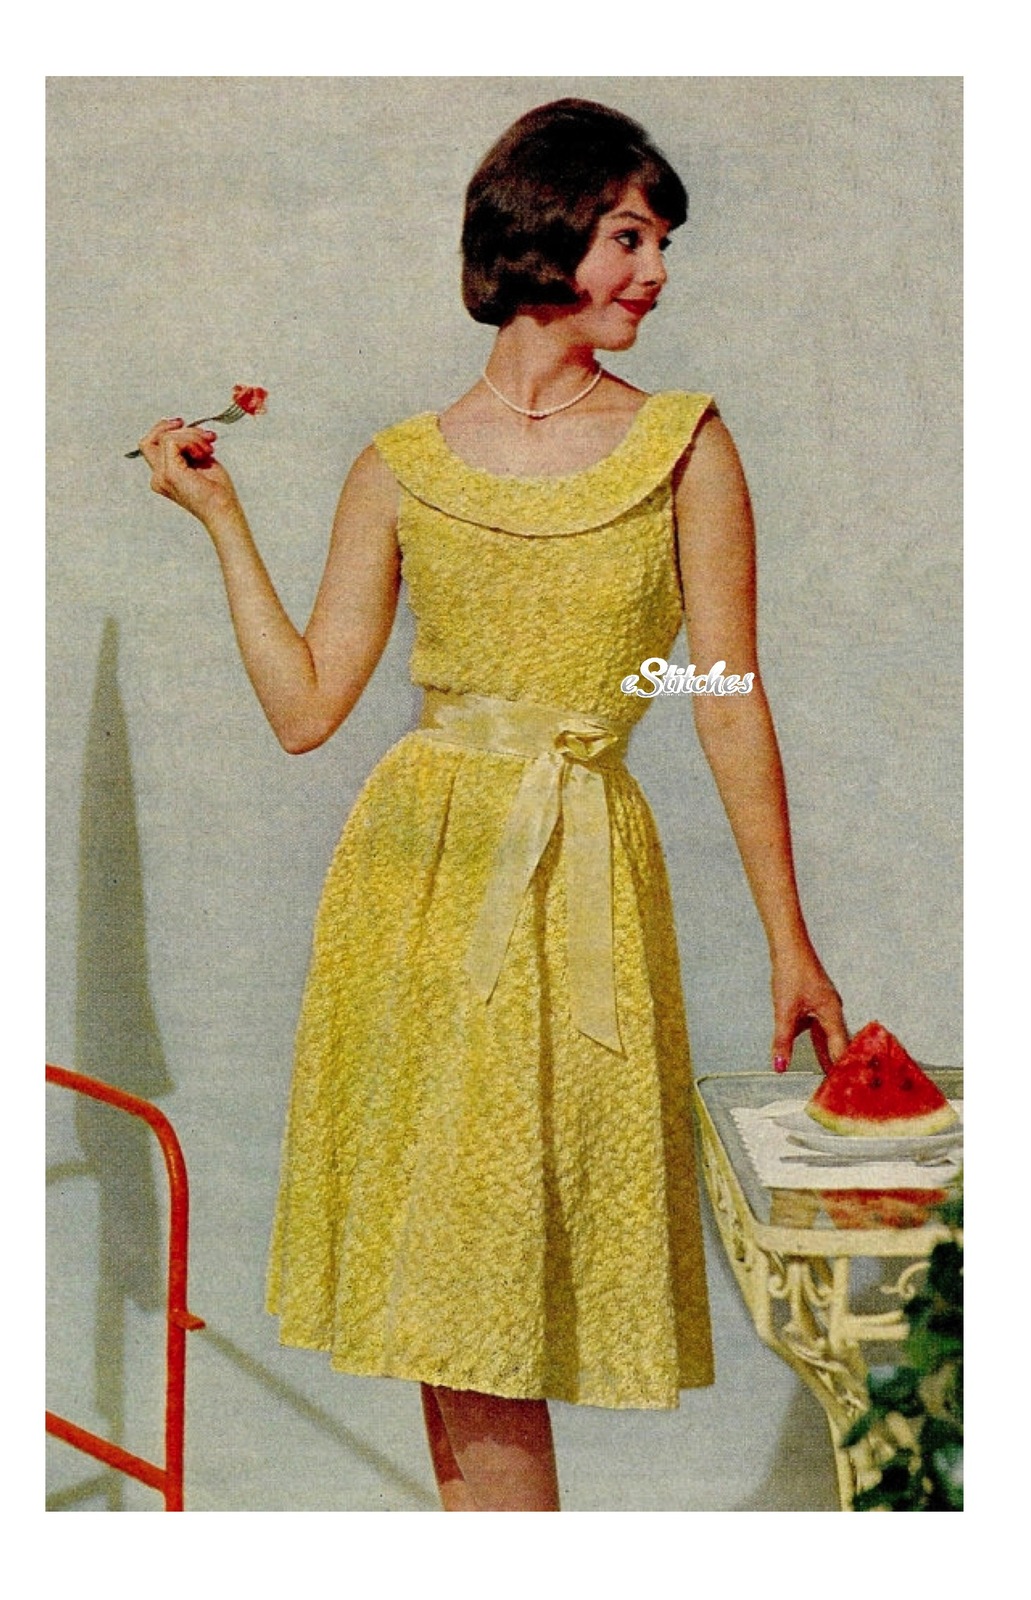 1960s Party Dress with Fun Scooped Neckline and Sash - Knit Pattern (PDF 1063) - $3.75